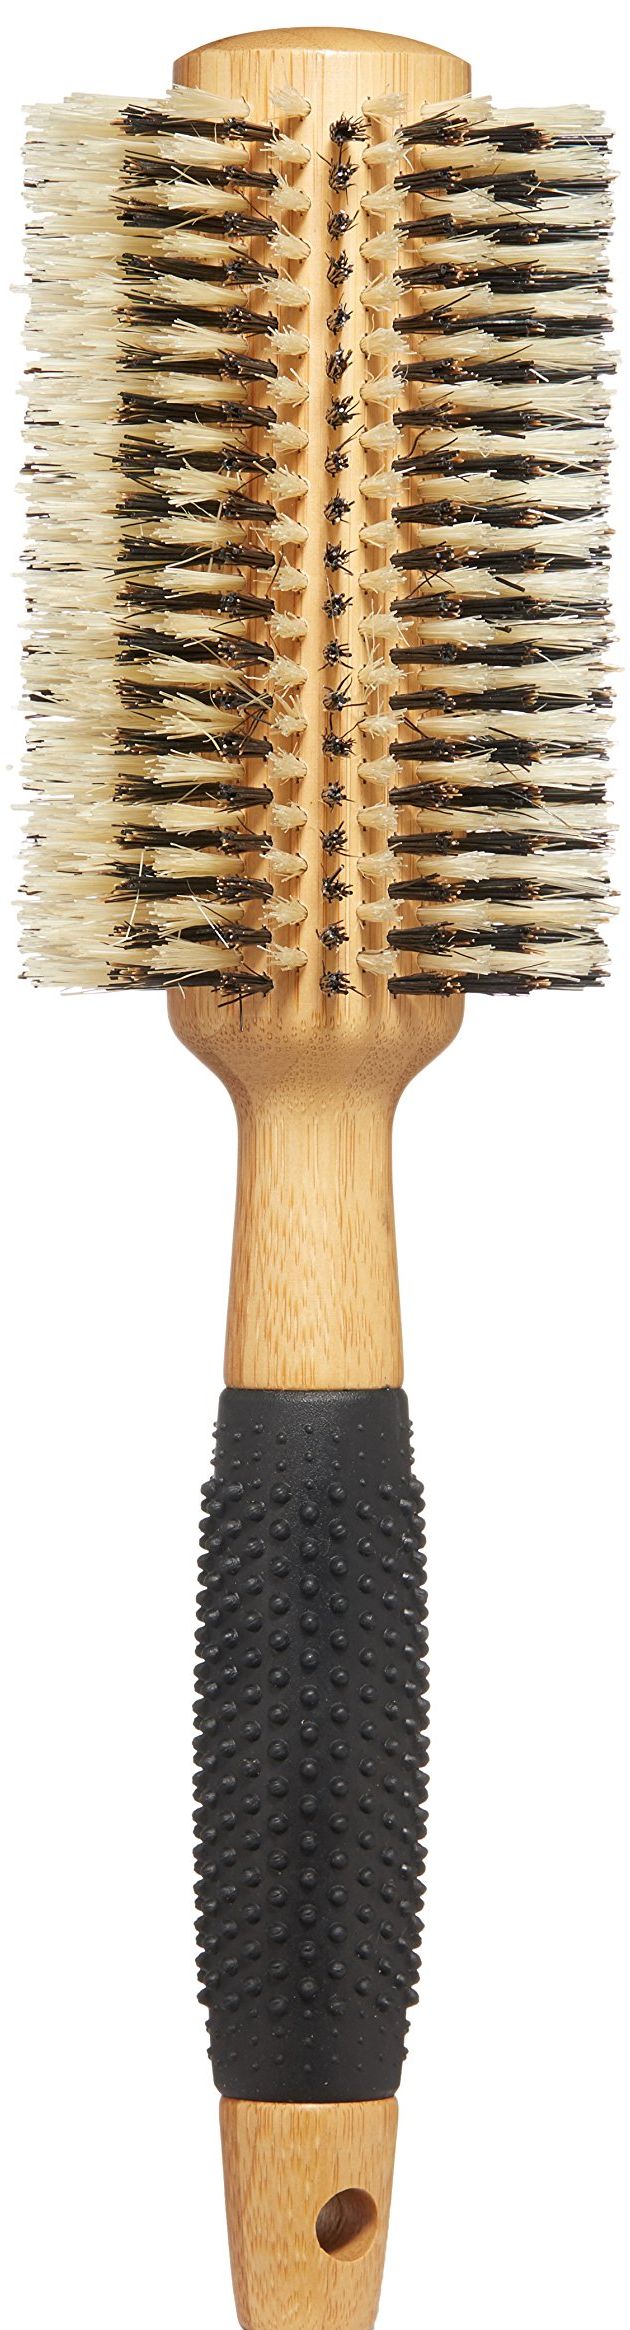 Your Ultimate Guide to Choosing Round Brushes